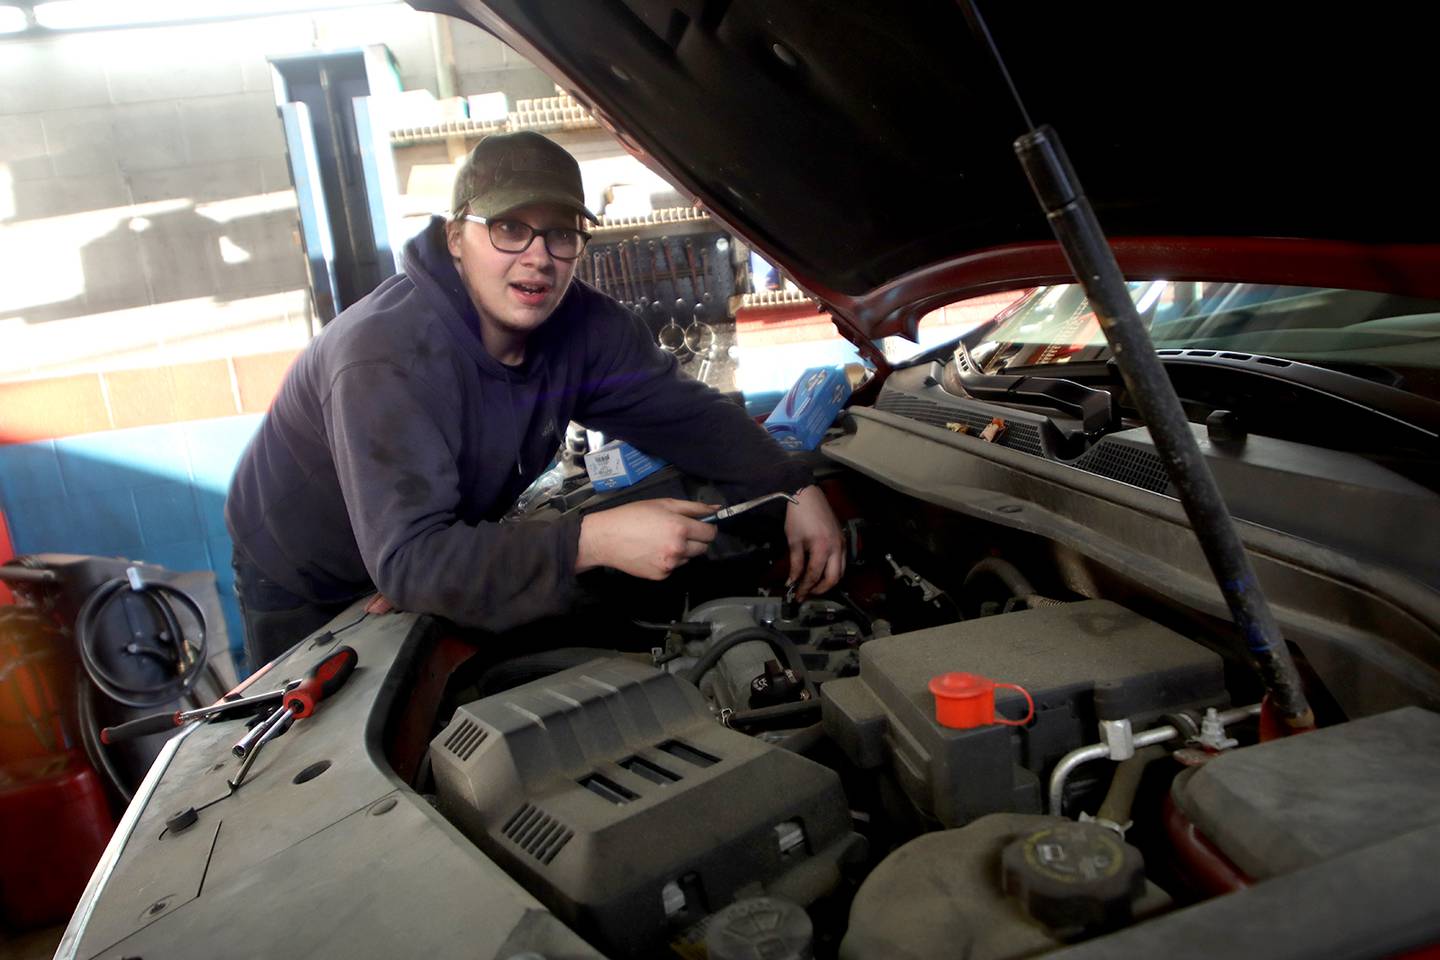 Technician Chris Dziedzic replaces a solenoid on a 2015 Chevy at Cary Tire and Auto on Thursday, Dec. 16, 2021. The local shop has experienced some of the worldwide supply chain delays which have impacted the cost and availability on replacement vehicle parts. While supply issues did not impact the repair of this particular car, Dziedzic said he has seen recent wild fluctuations on prices and sparse availability for brake rotors.